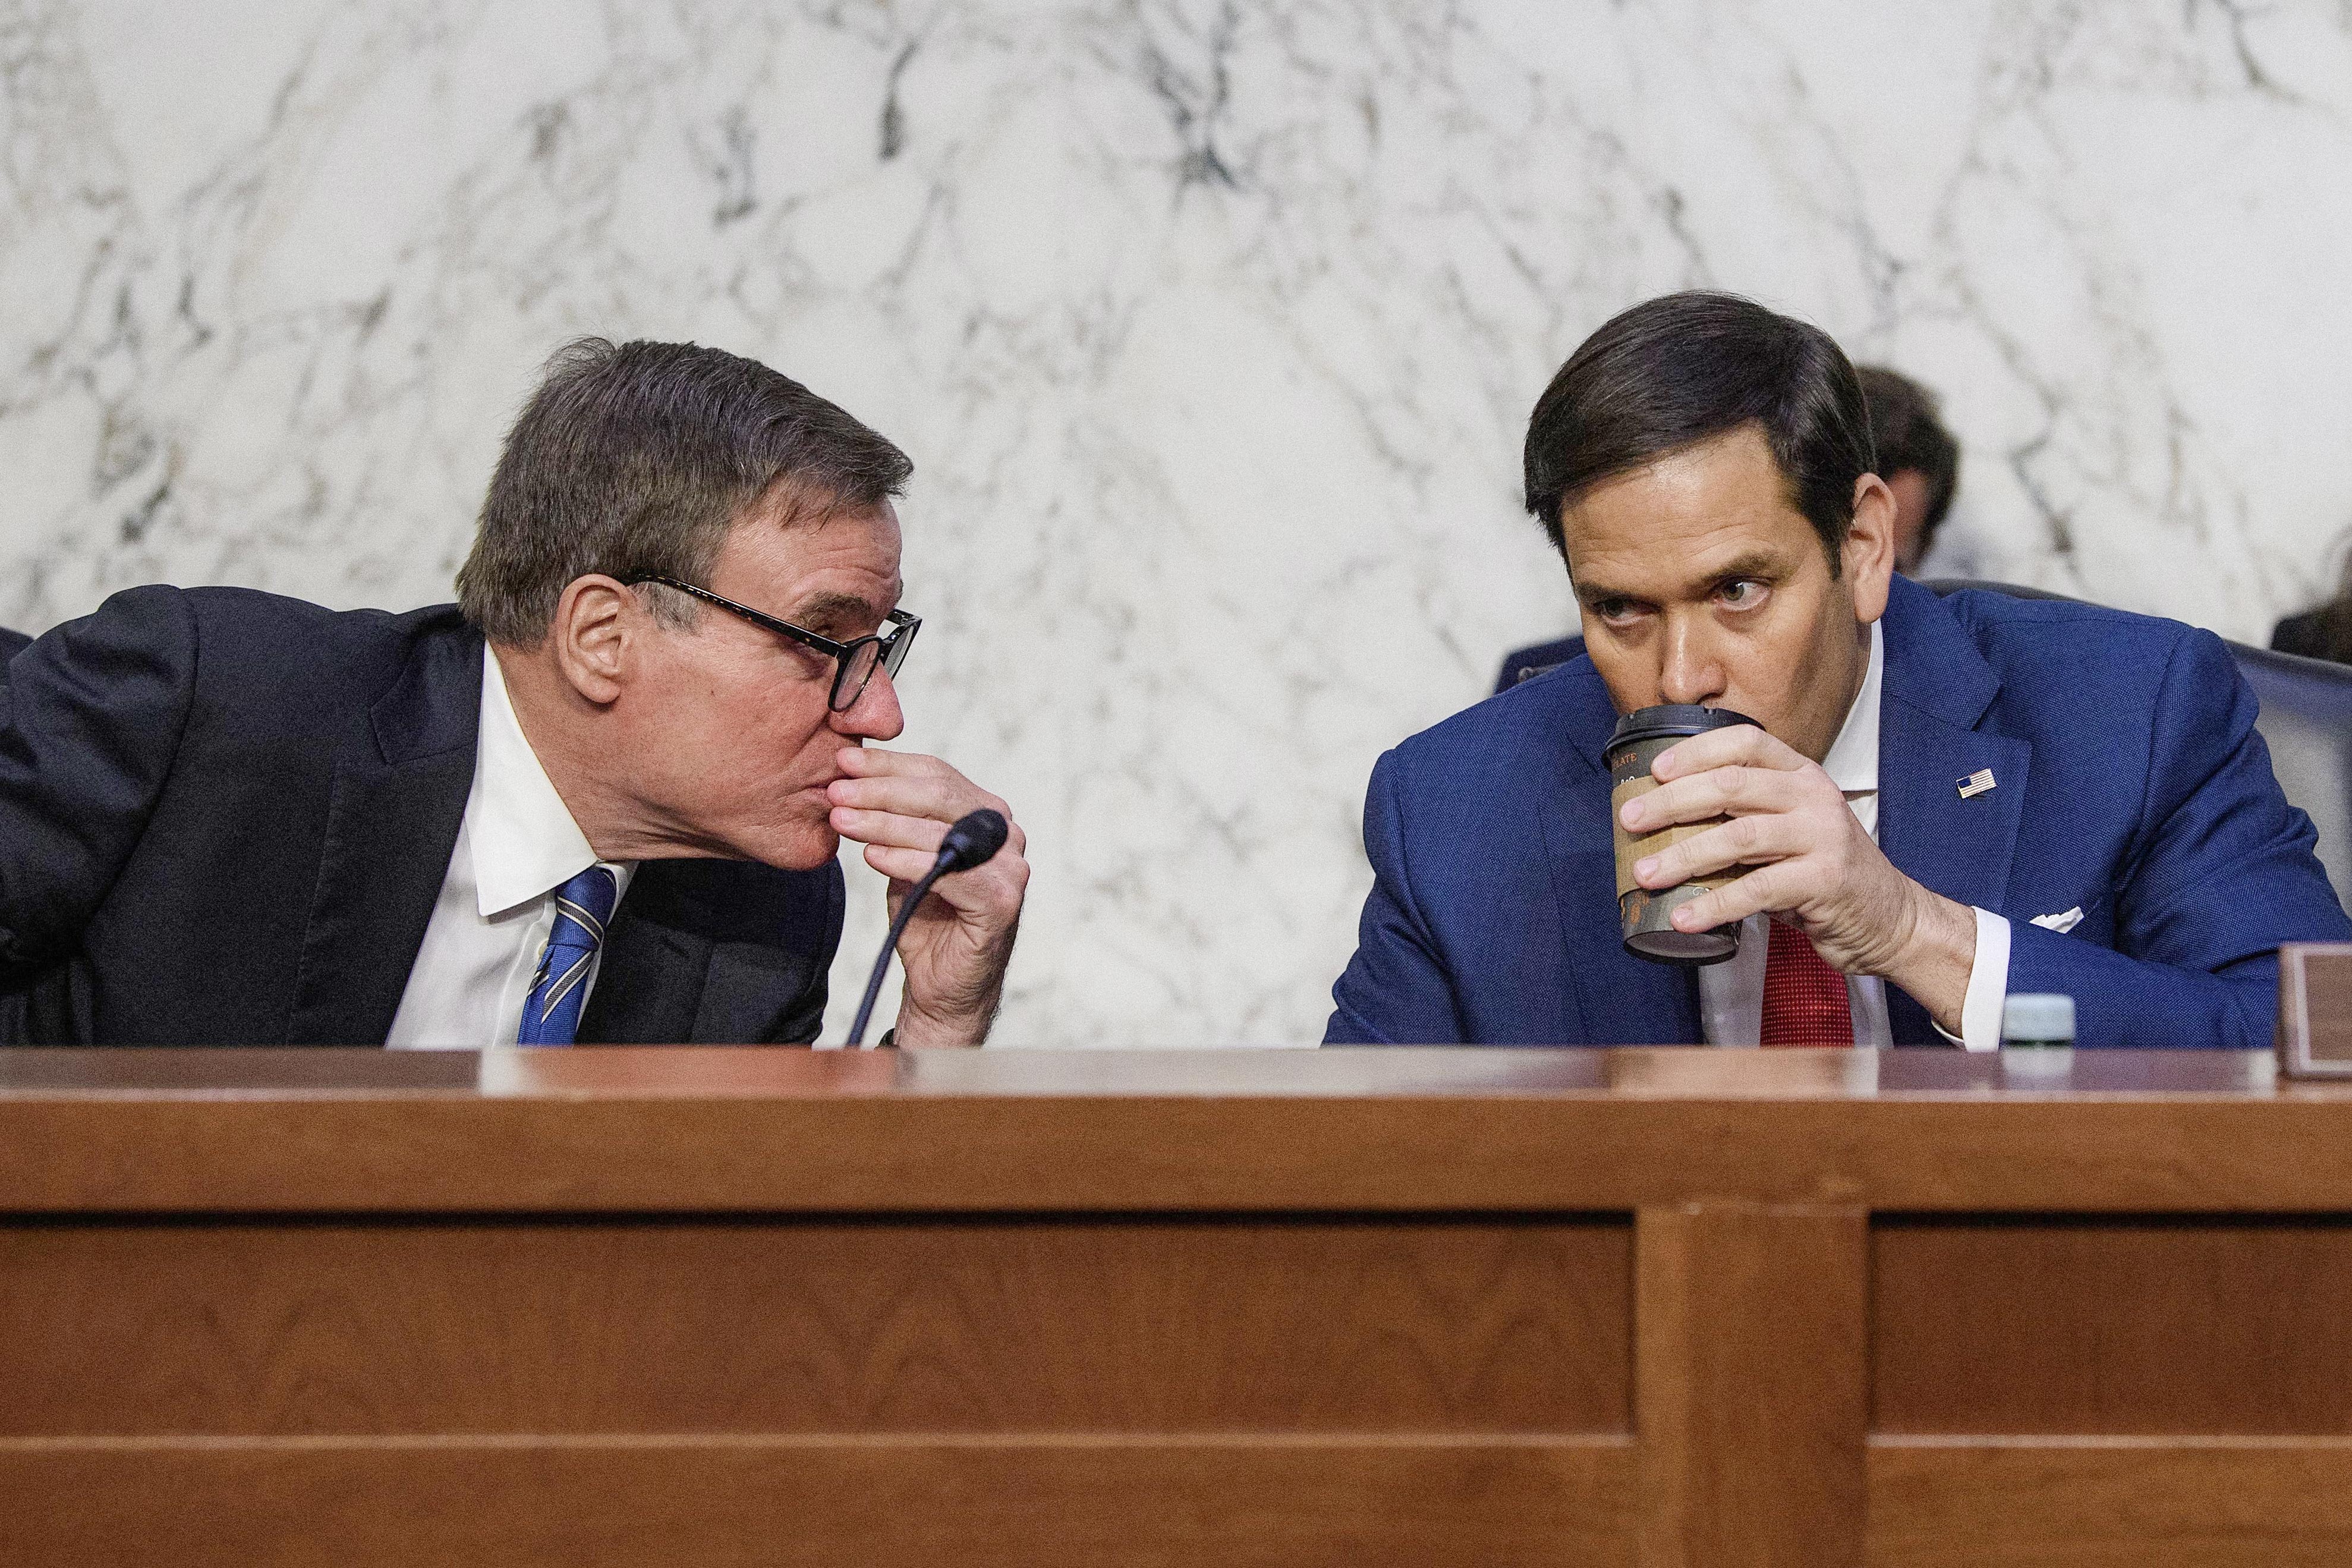 Warner leans over to Rubio to tell him something, pinching around his mouth, as Rubio sips from a paper coffee cup.